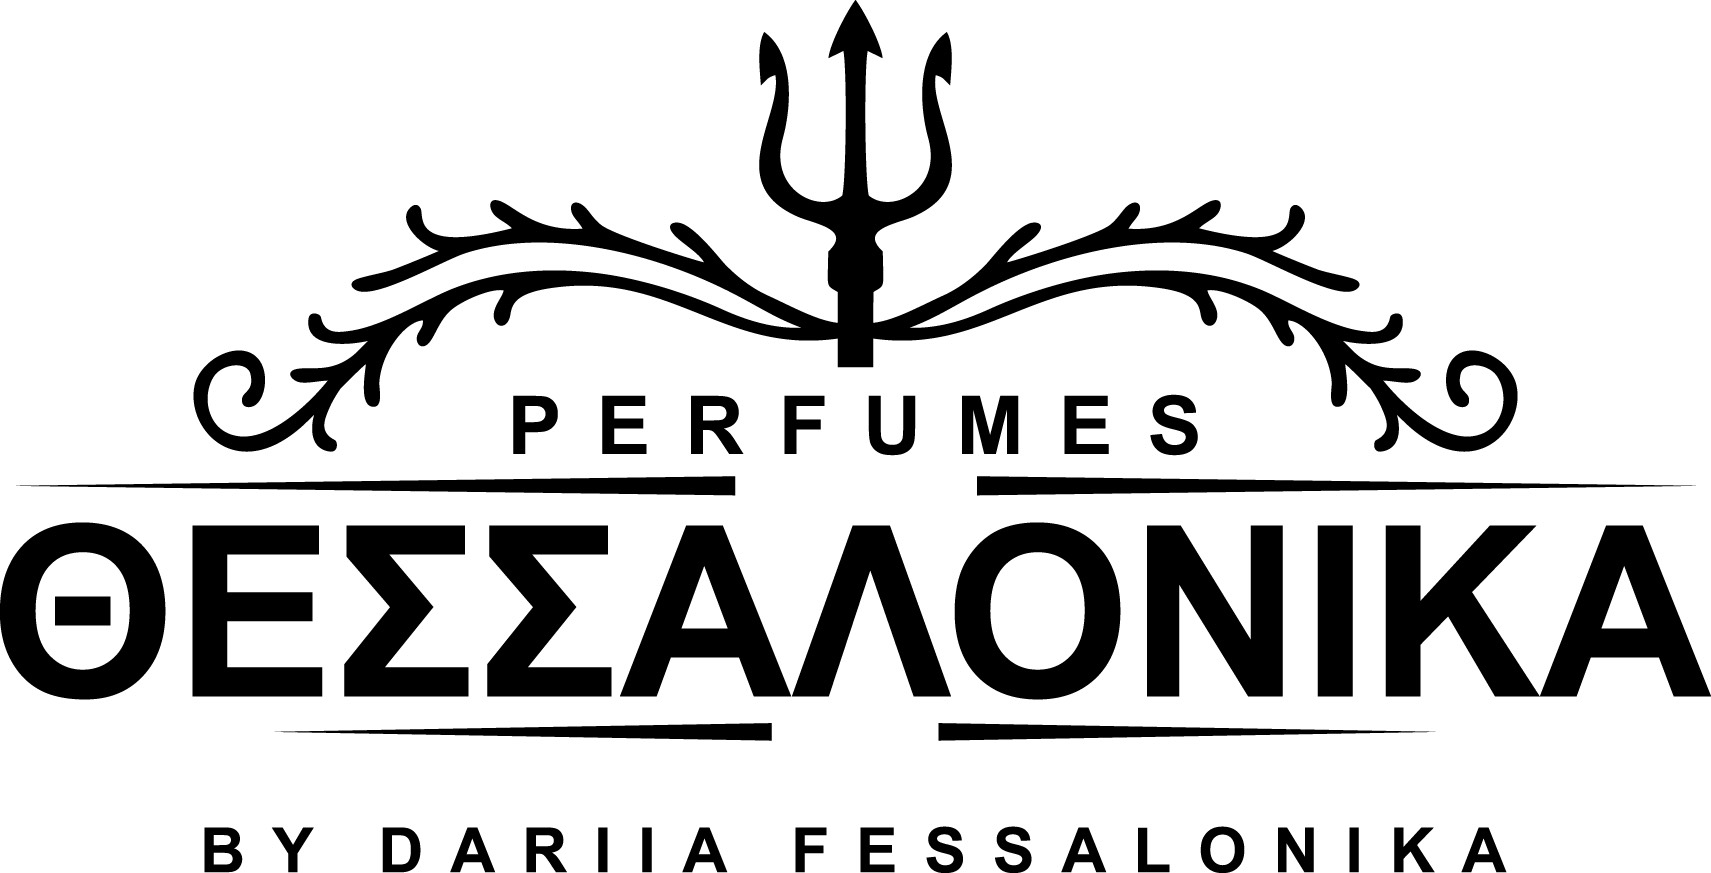 Fessalonika perfumes and colognes